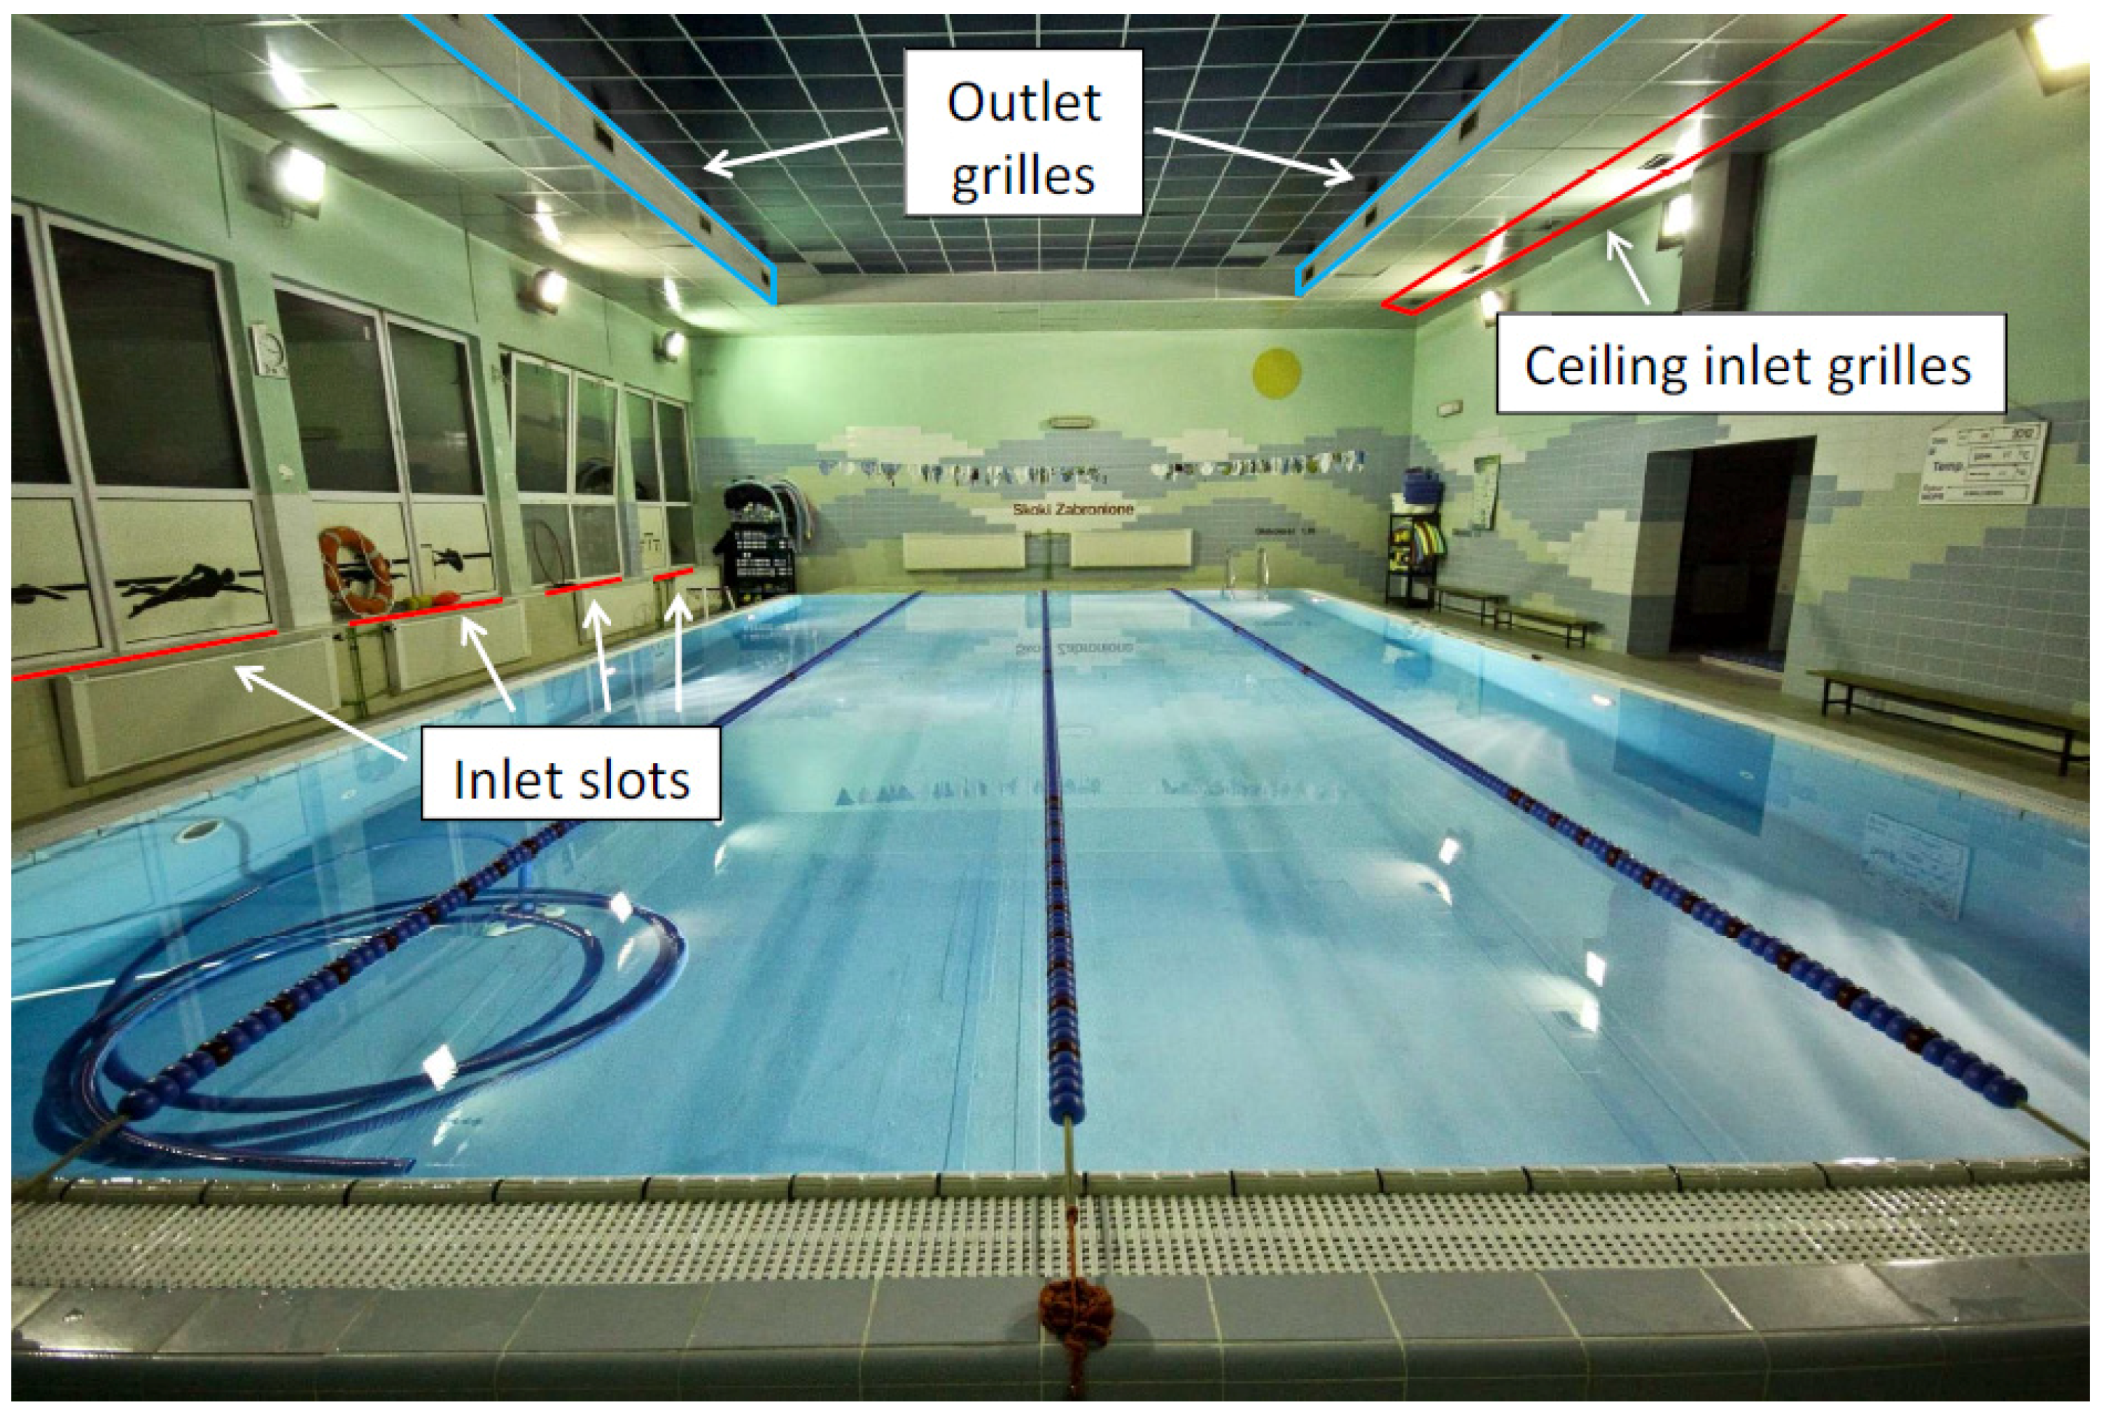 Energies | Free Full-Text | Numerical Analysis of the Energy Consumption of  Ventilation Processes in the School Swimming Pool | HTML